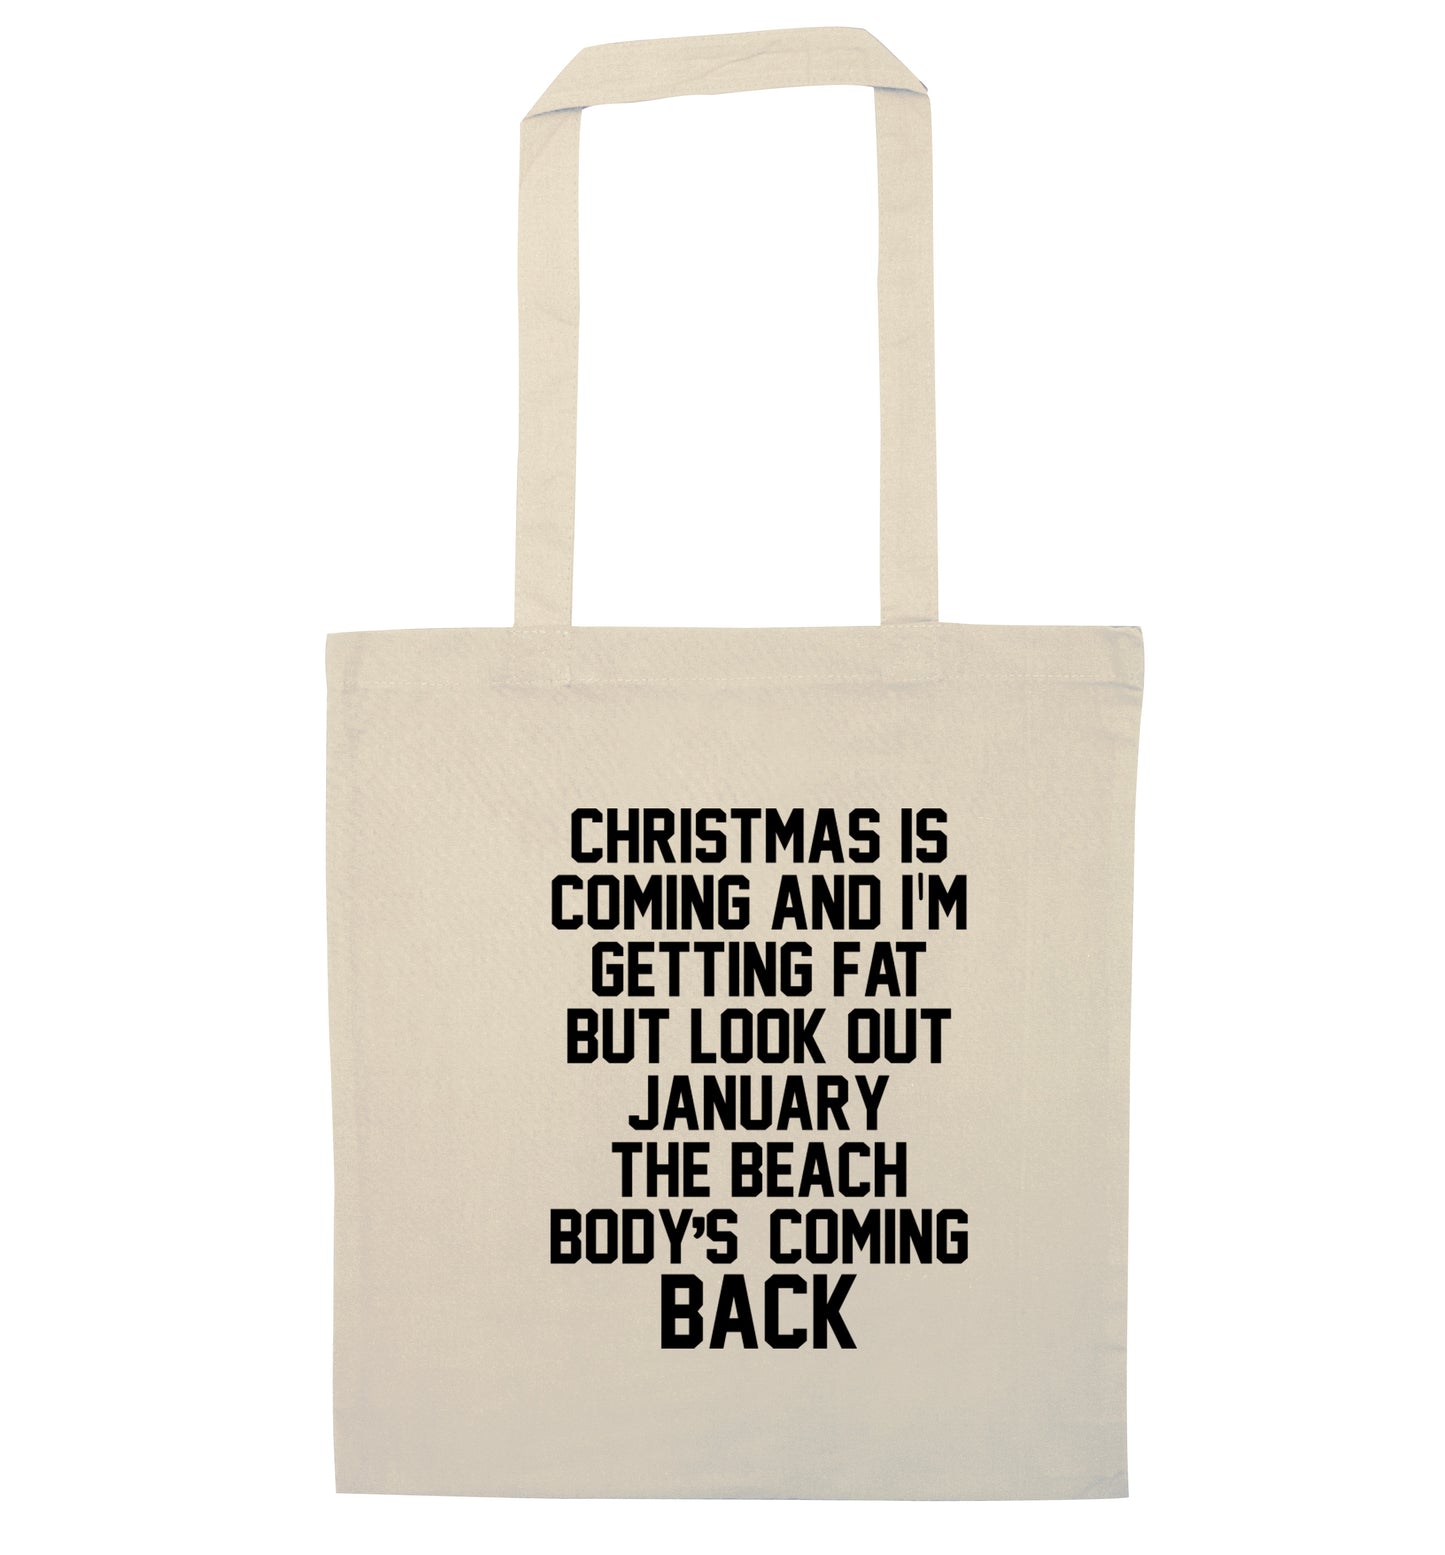 Christmas is coming and I'm getting fat but look out January the beach body's coming back! natural tote bag